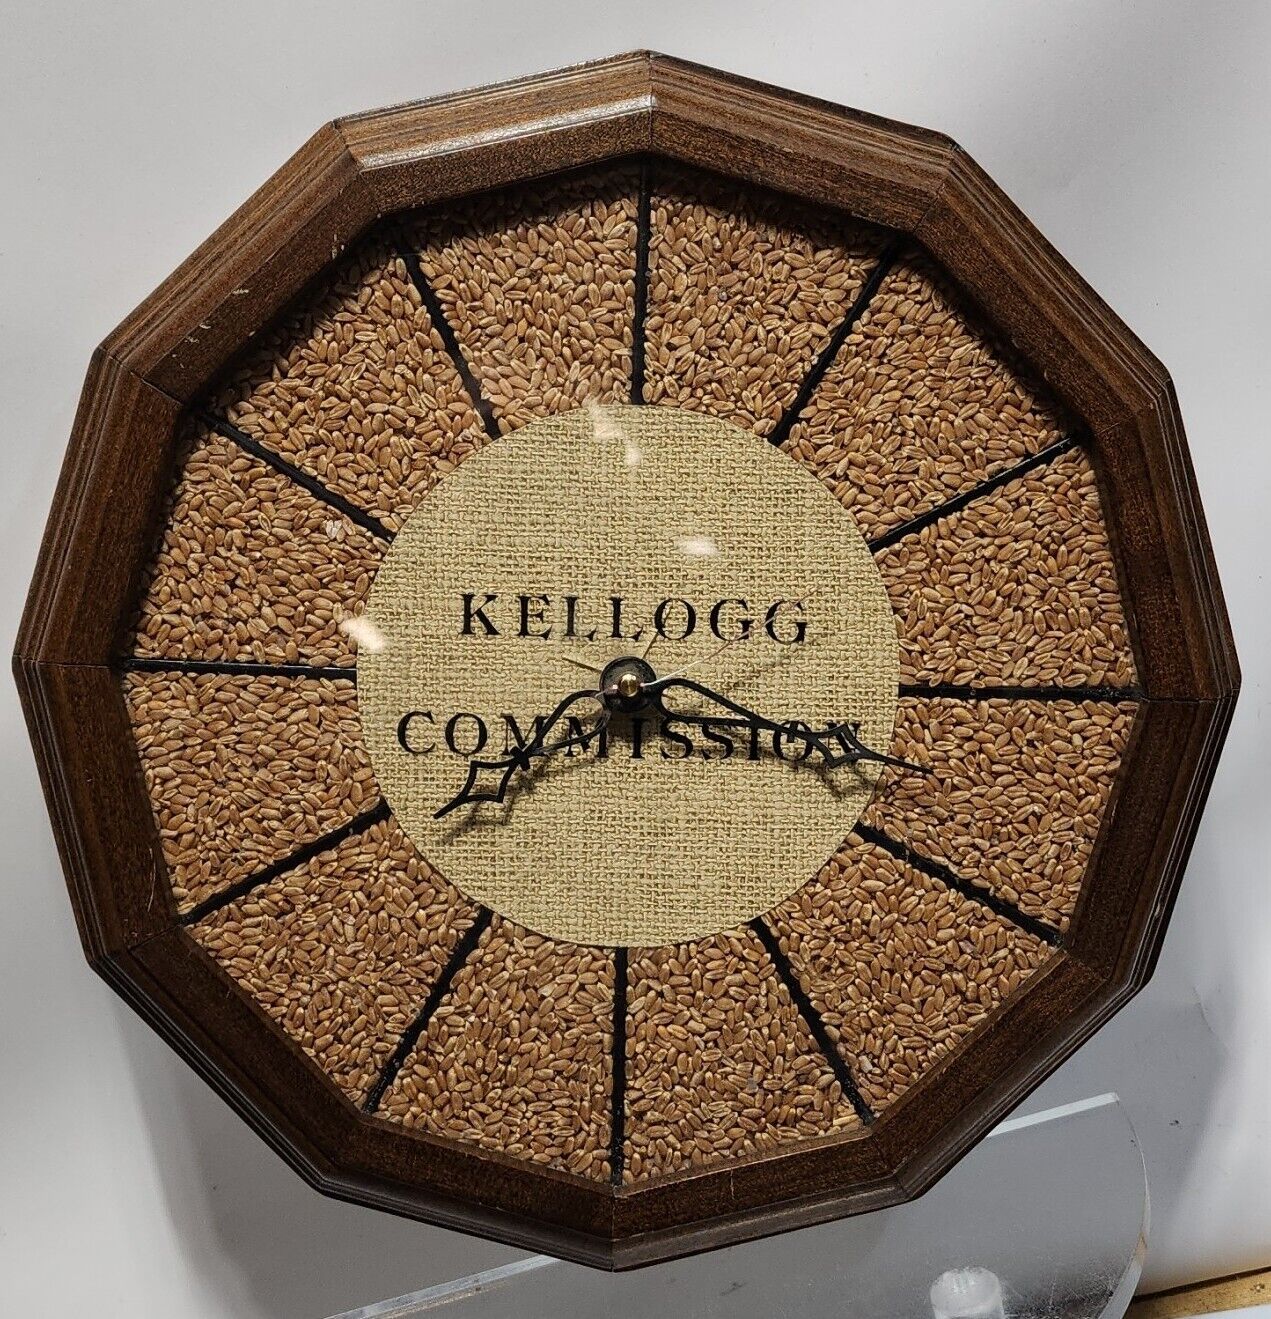 Kellogg Commission Wall Clock 1990s Agriculture Seed Feed Program Rare Works 